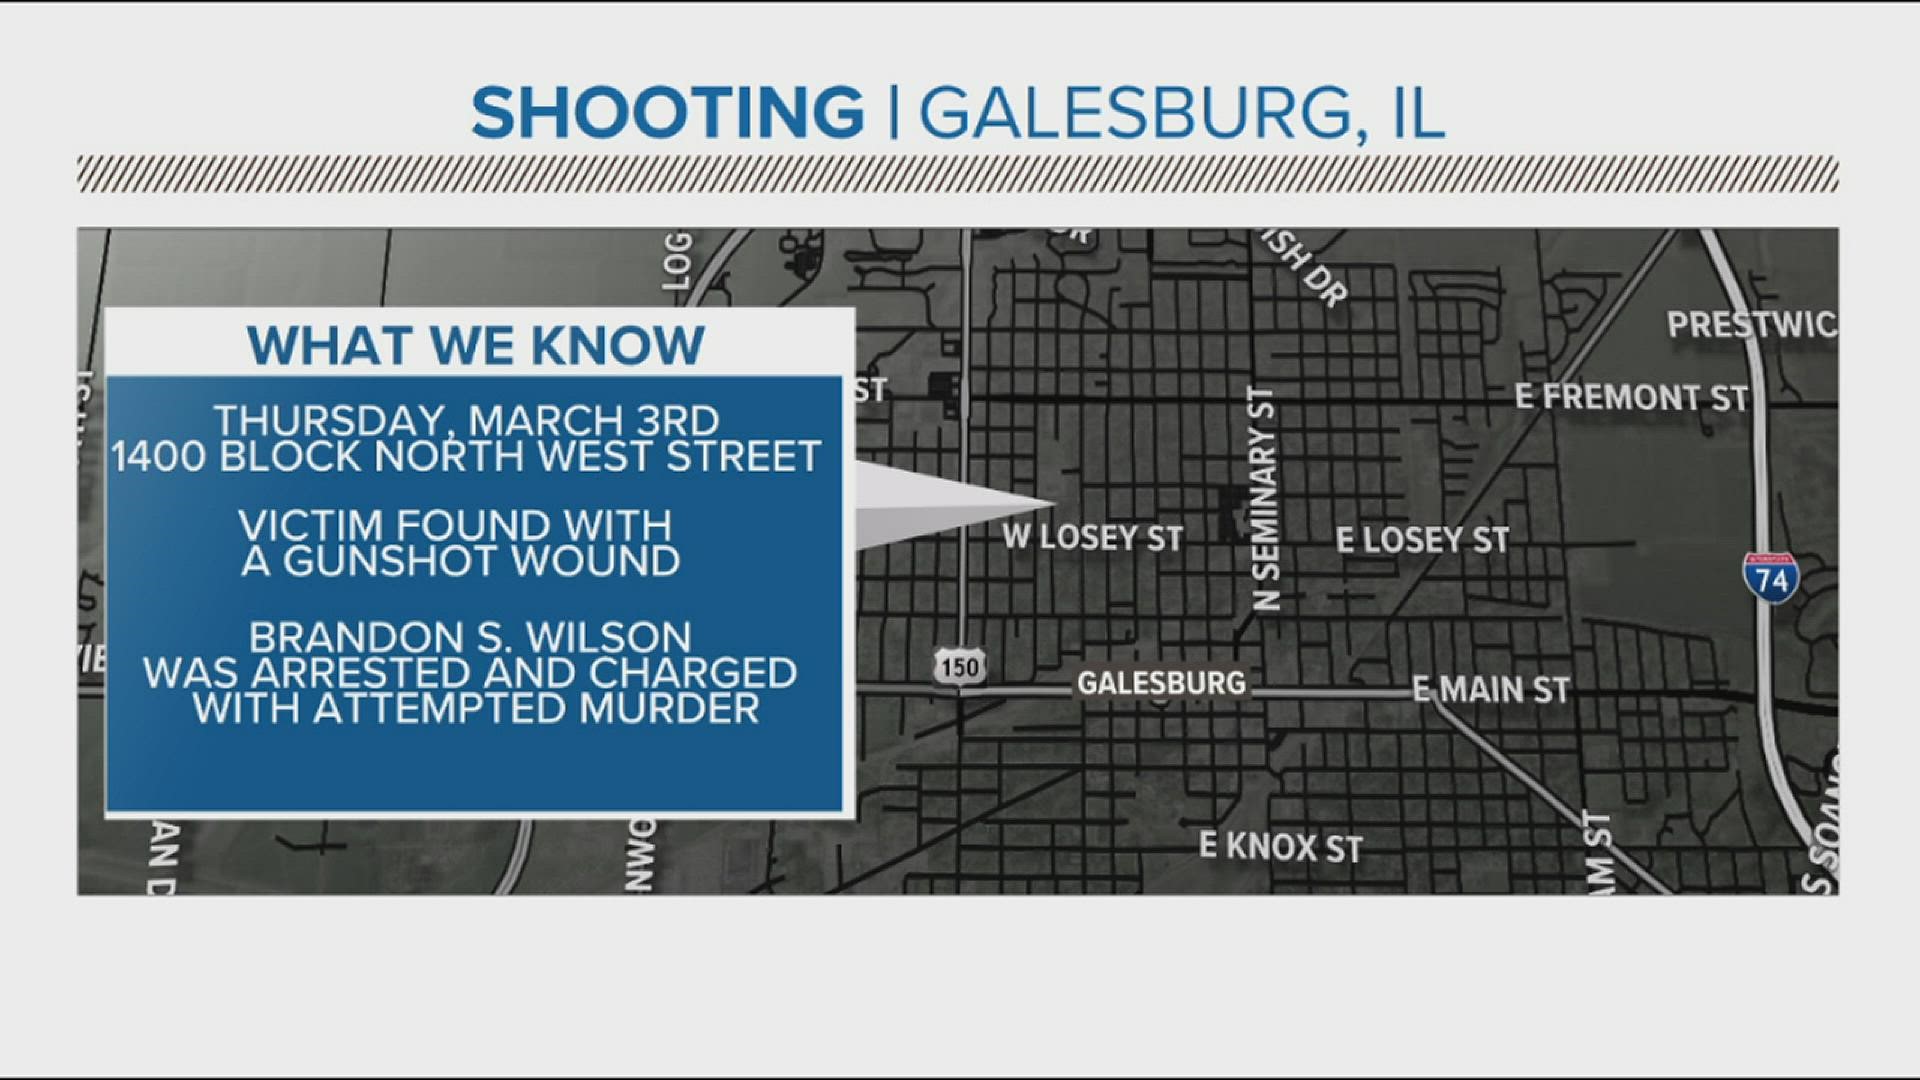 The incident that left one with a gunshot wound to the torso happened Thursday on North West Street in Galesburg.